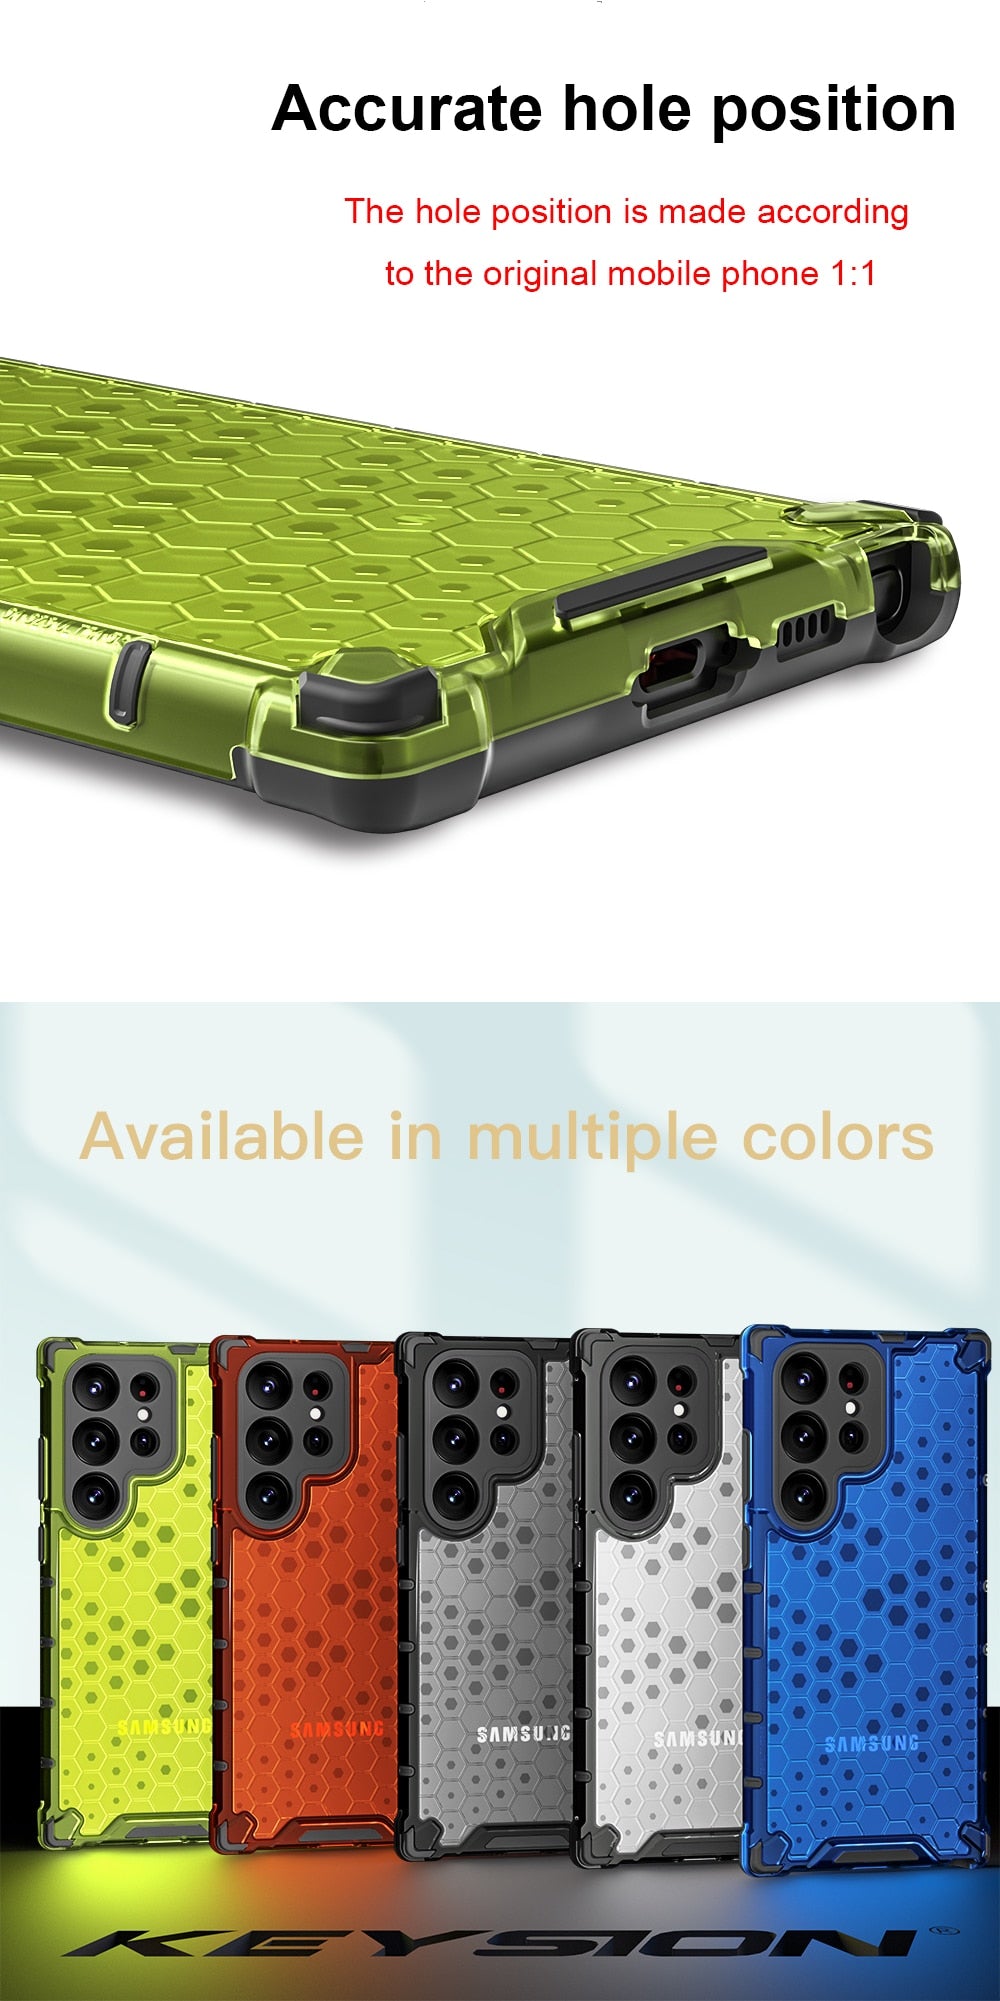 Keysion Honeycomb  Shockproof Case for Samsung - Premium Mobile Phone Cases from Keysion - Just $19.00! Shop now at Dressmycell.com